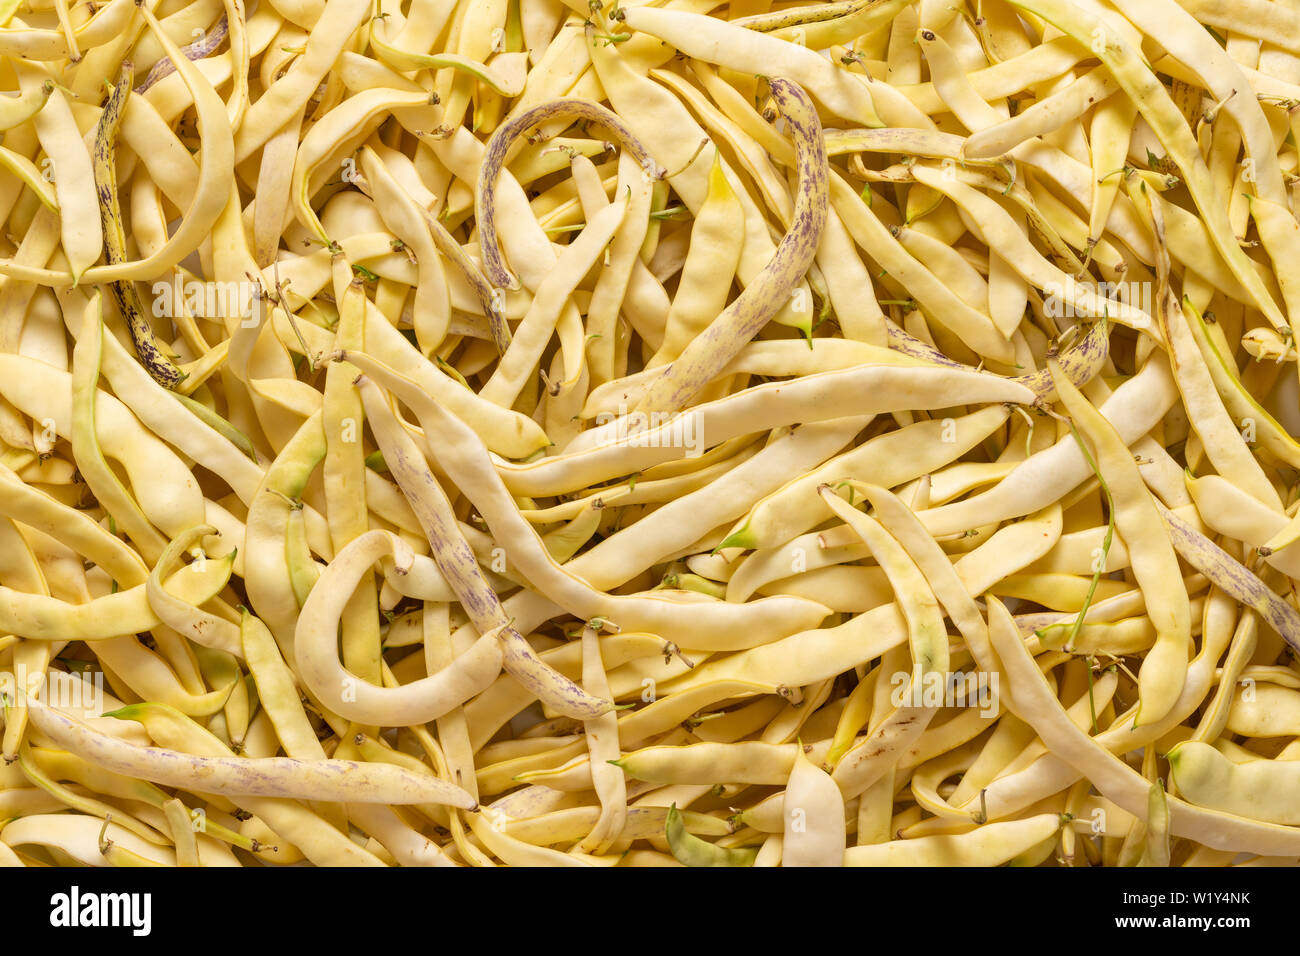 Background of organic flat yellow wax beans, different sizes and shapes. Stock Photo